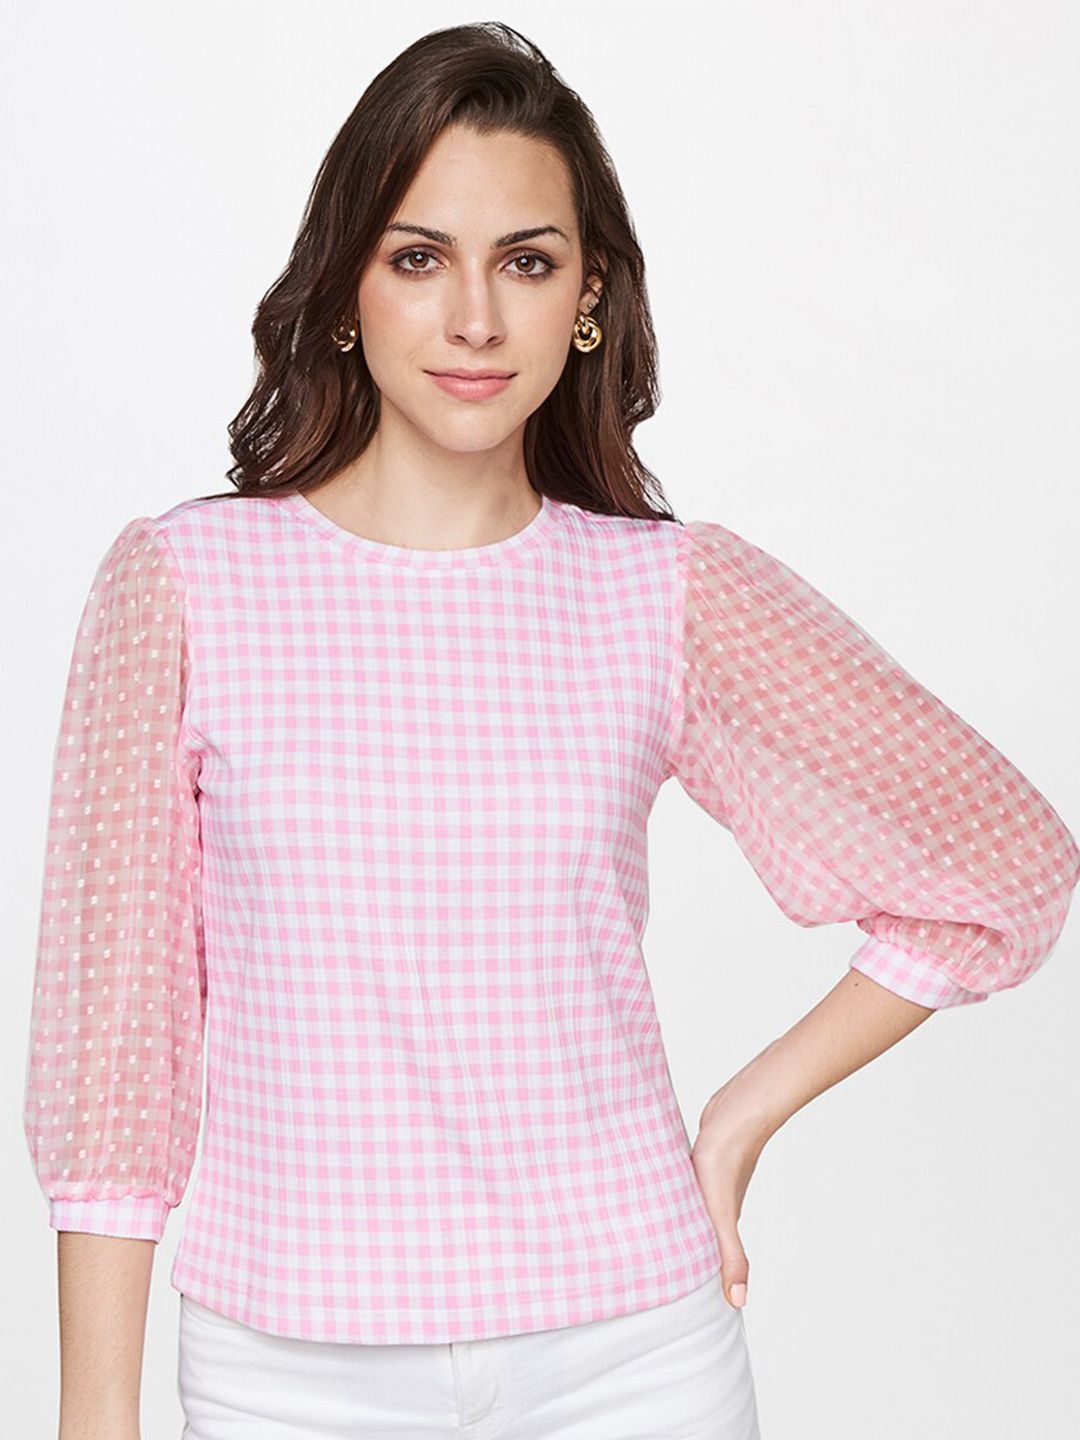 AND Women Pink & White Checked Top Price in India